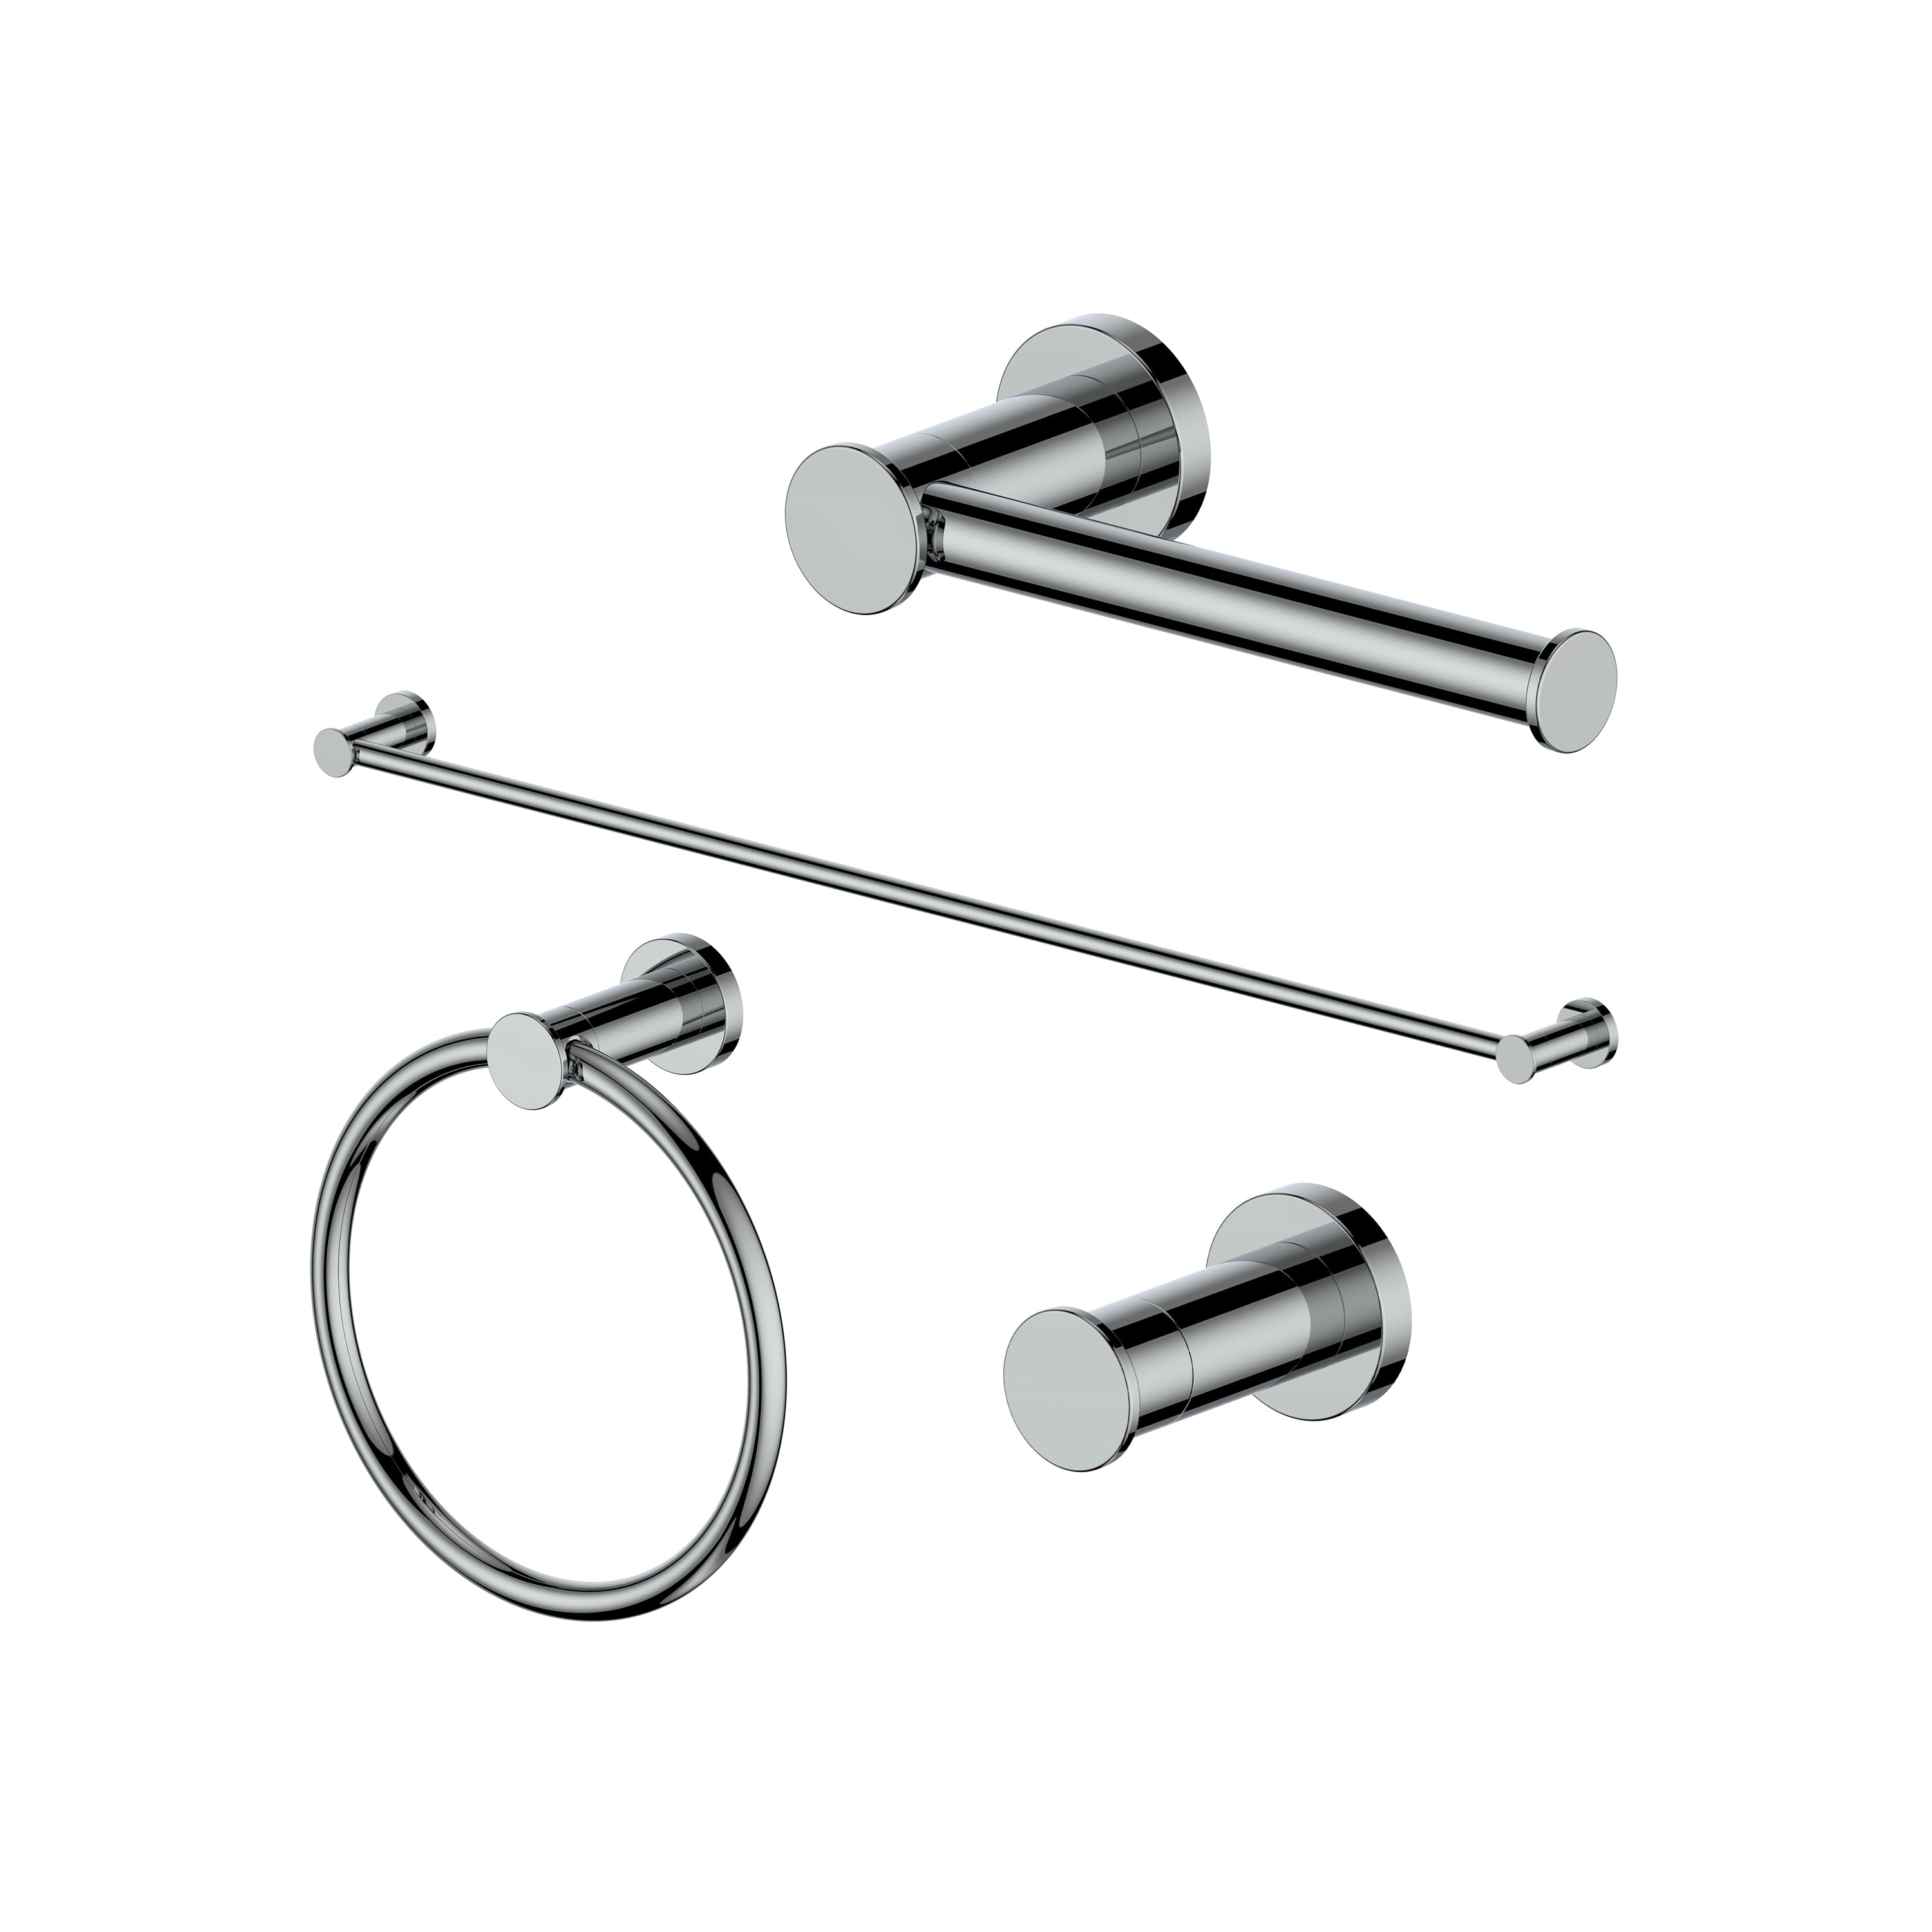 ZLINE Emerald Bay Bathroom Accessories Package with Towel Rail, Hook, Ring and Toilet Paper Holder with Color Options (4BP-EMBYACC)